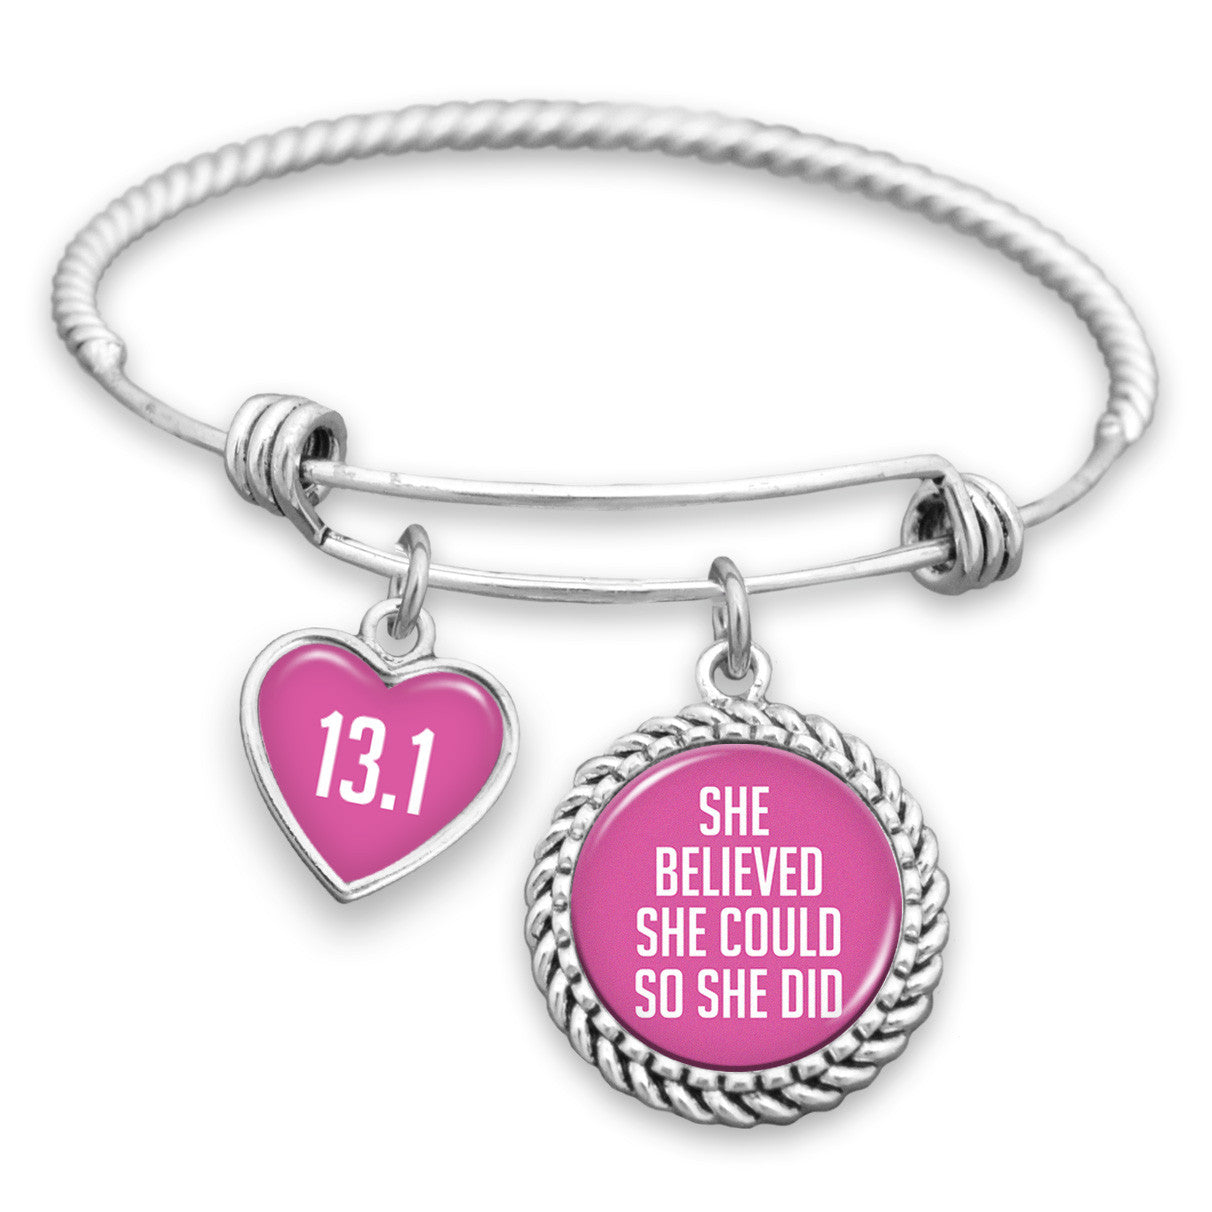 She Believed She Could So She Did Personalized Charm Bracelet